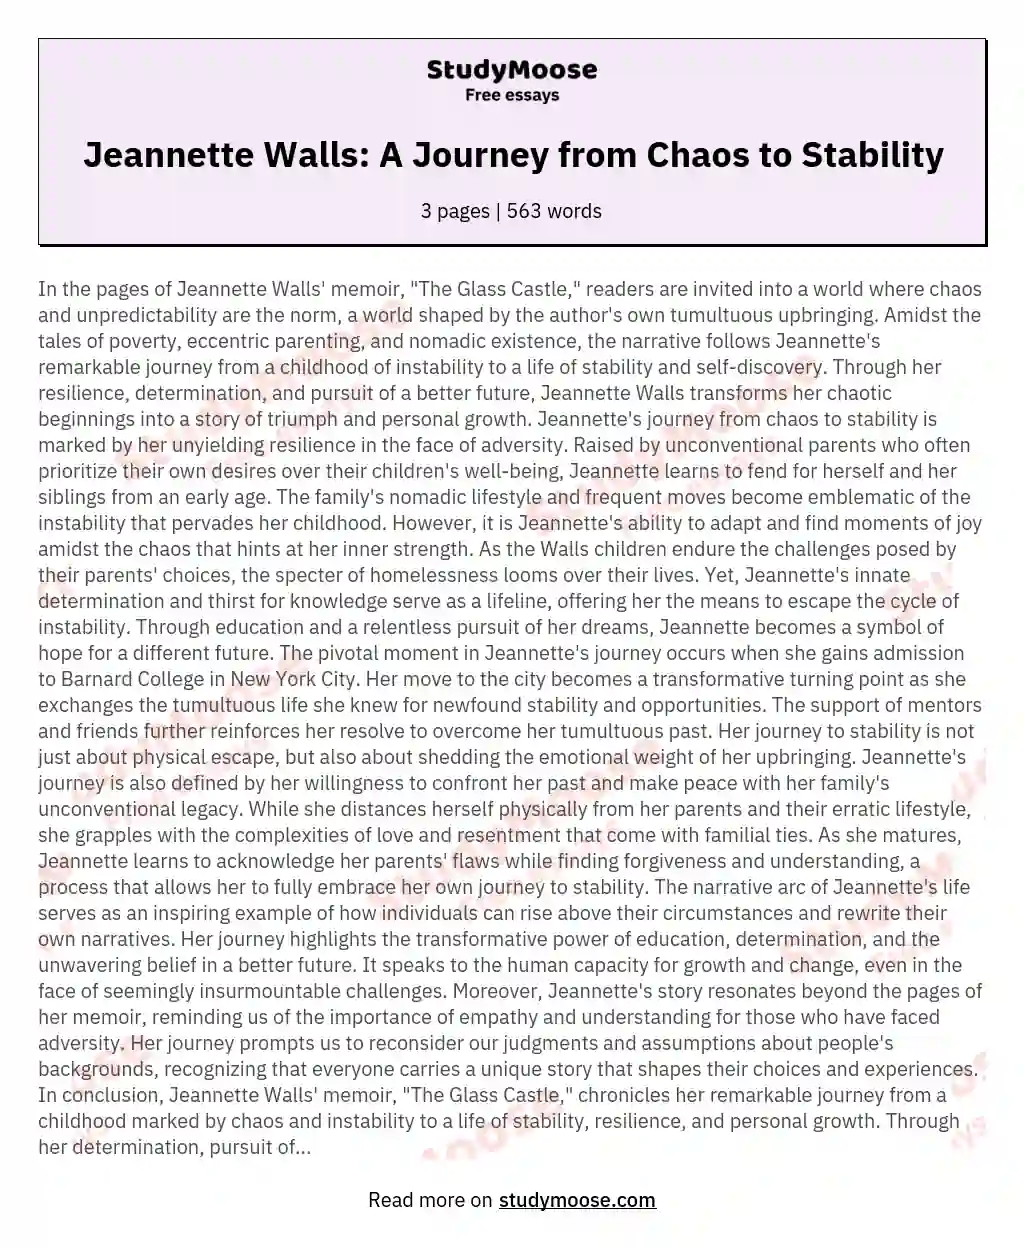 Jeannette Walls: A Journey from Chaos to Stability essay